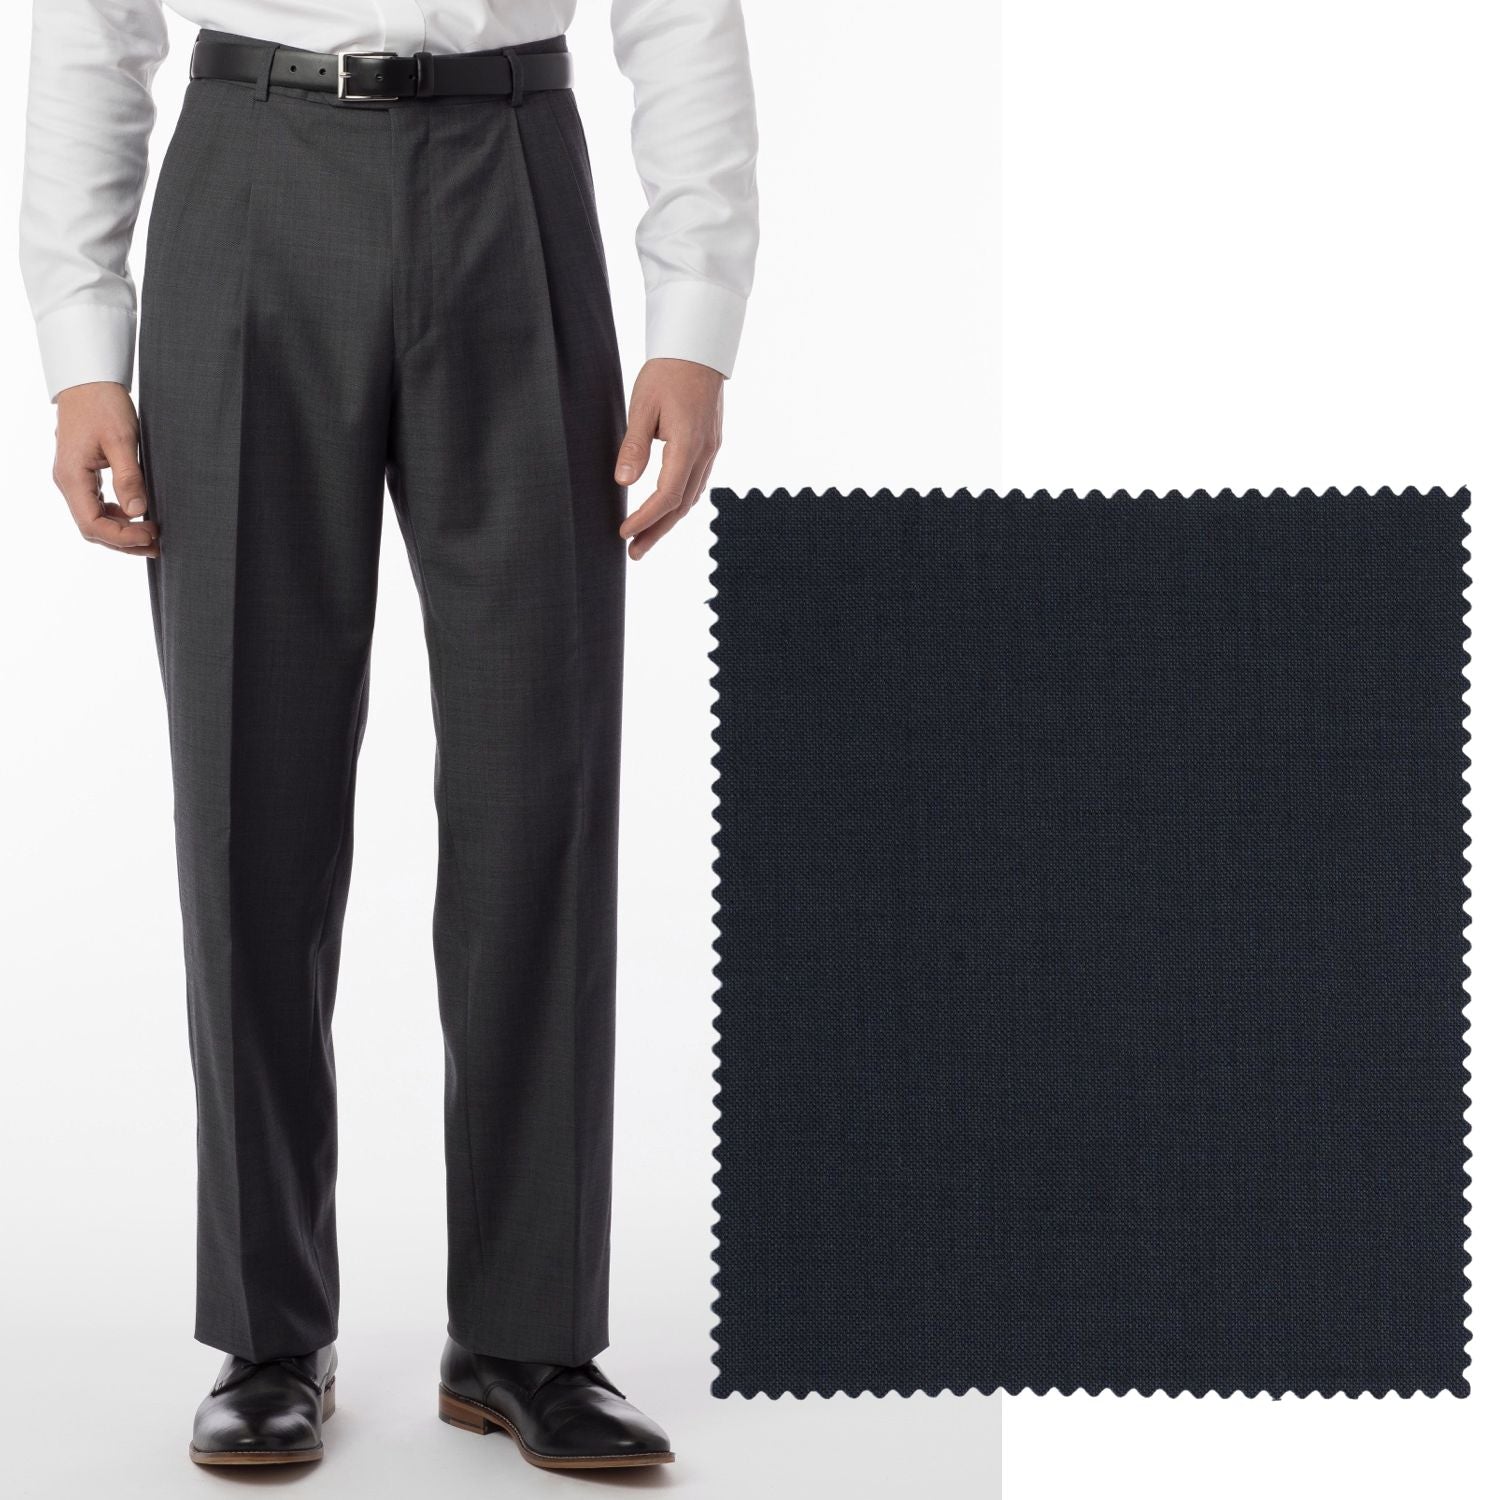 Sharkskin Super 120s Worsted Wool Comfort-EZE Trouser in Navy (Manchester Pleated Model) by Ballin